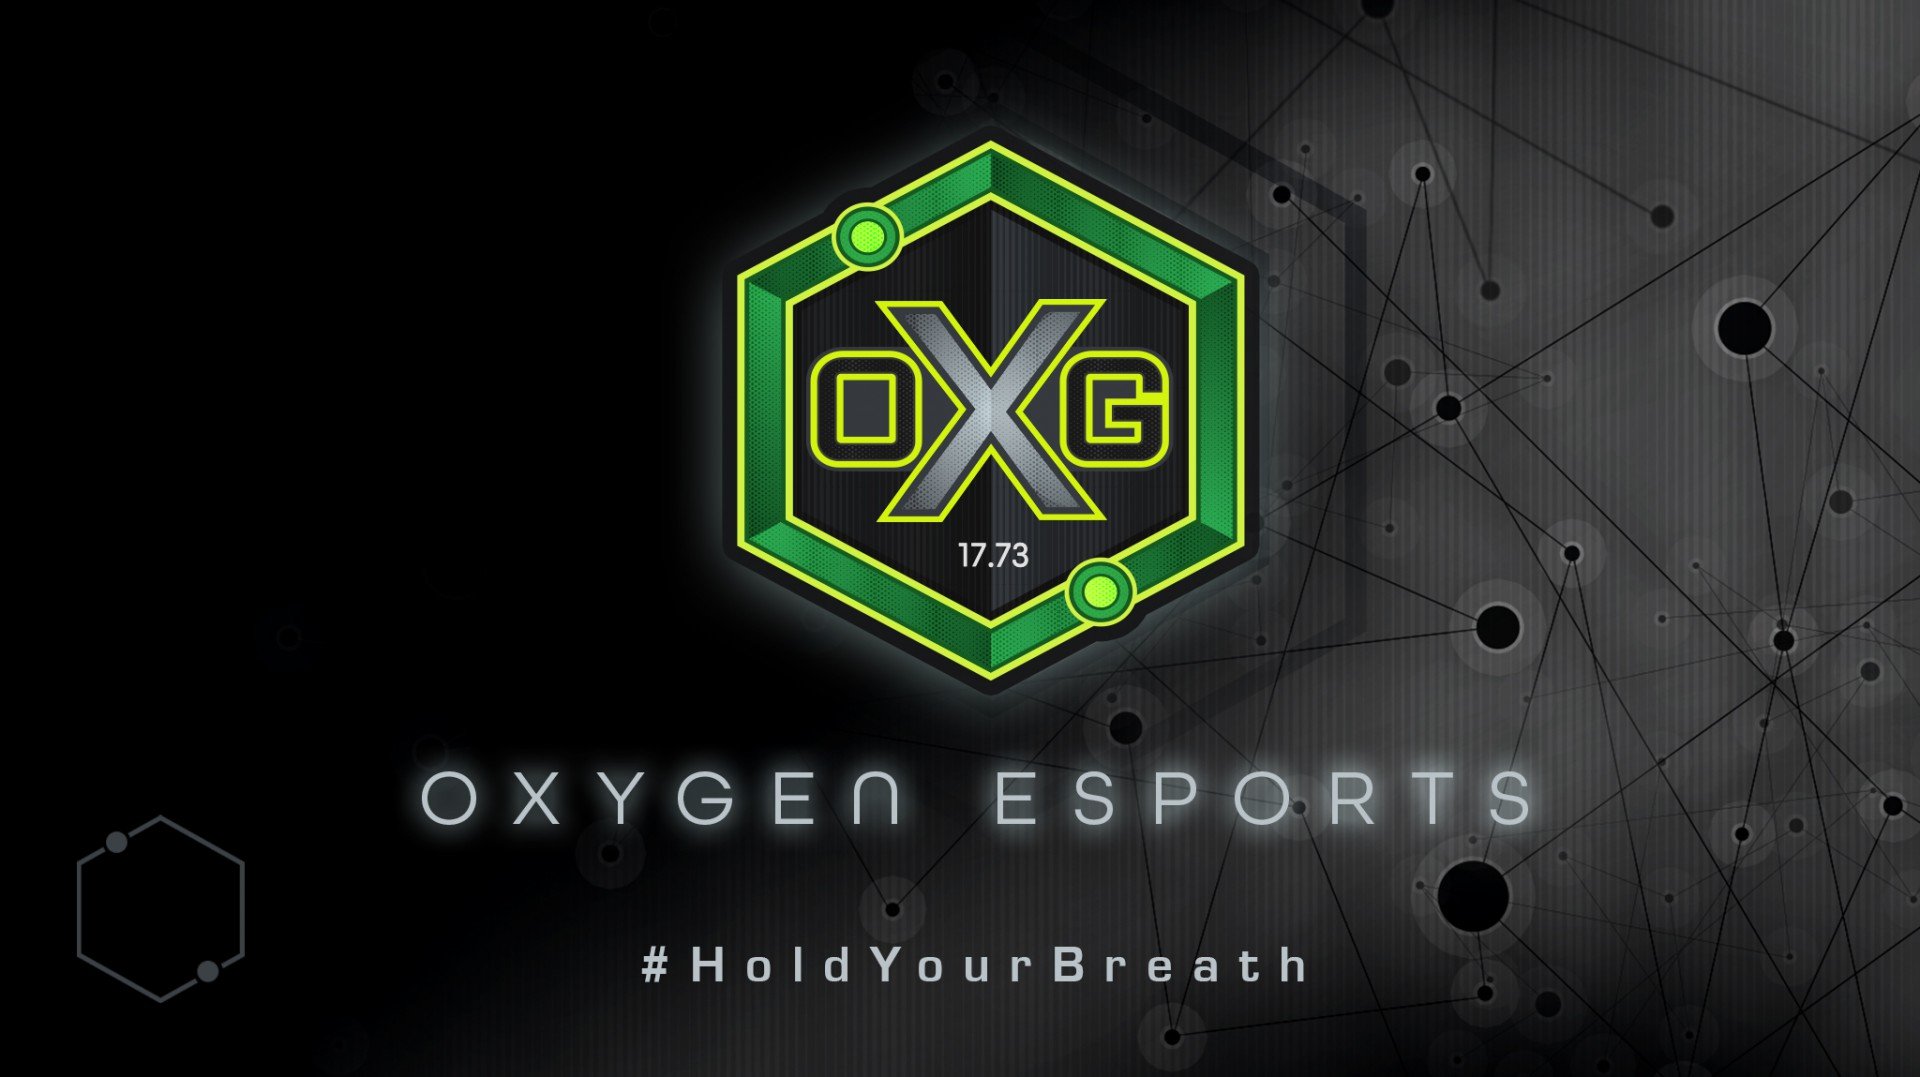 Oxygen Esports Launches